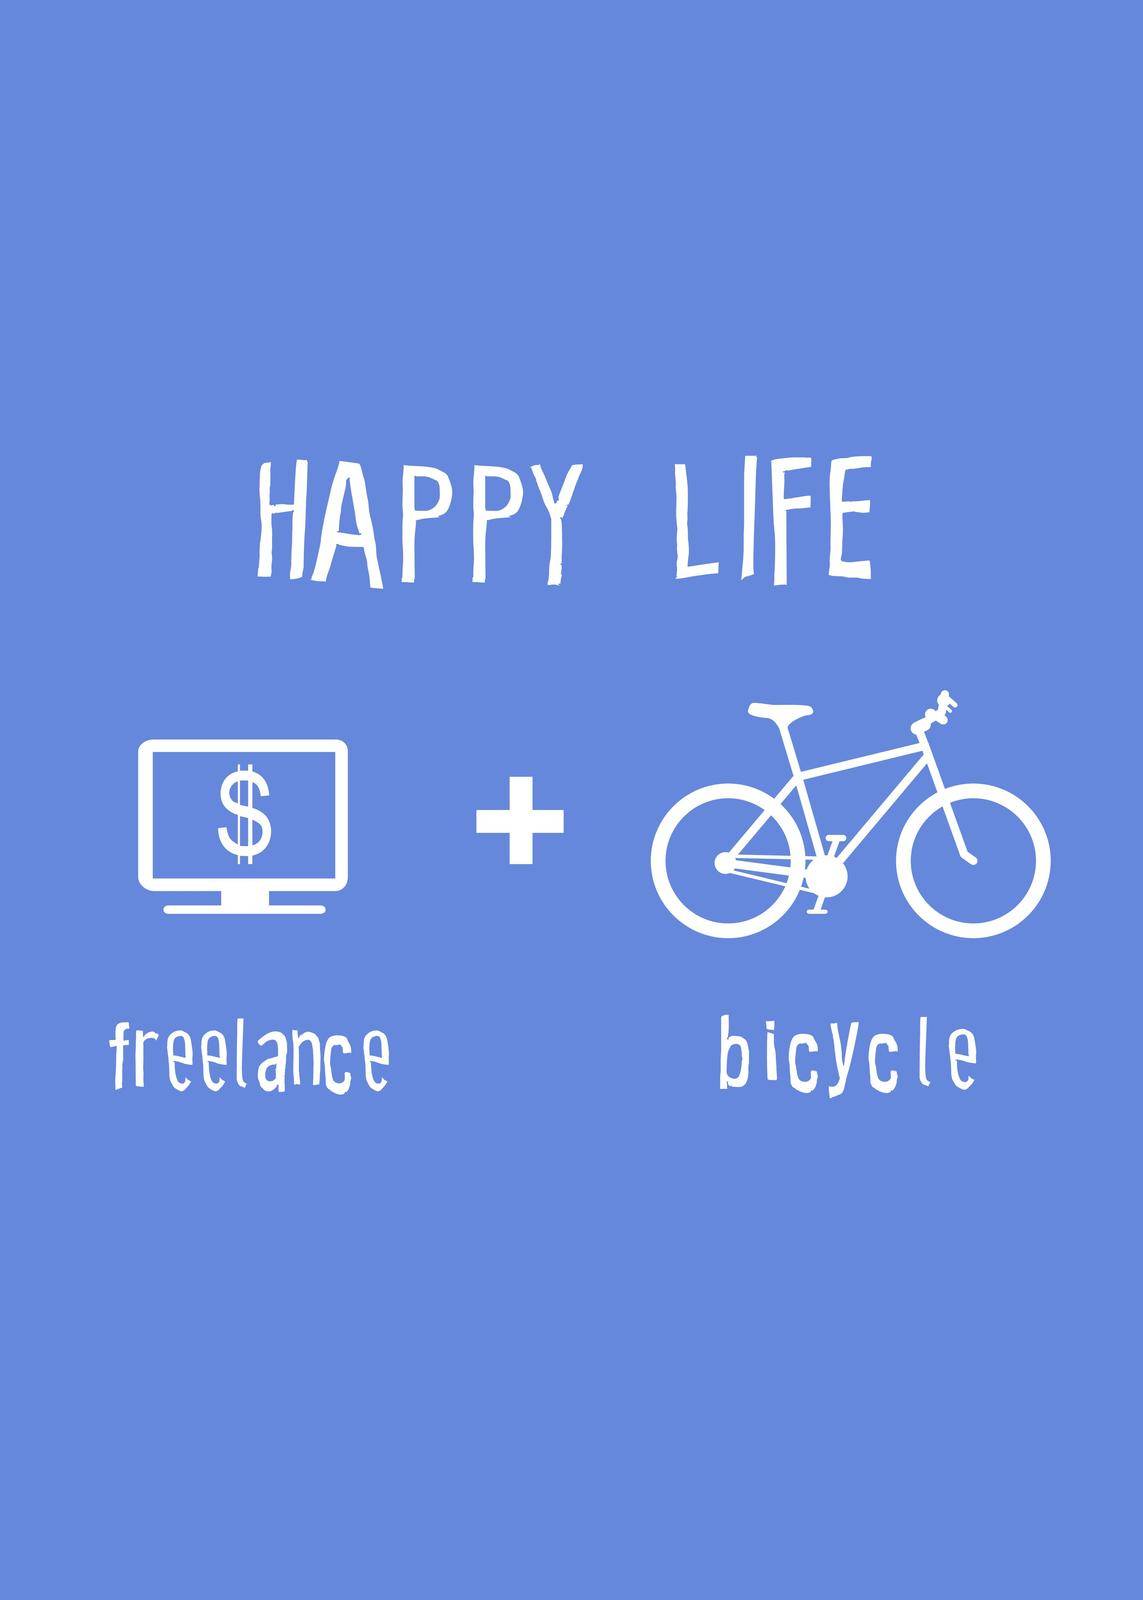 Happy life poster freelance and bicycle. Vector flat design